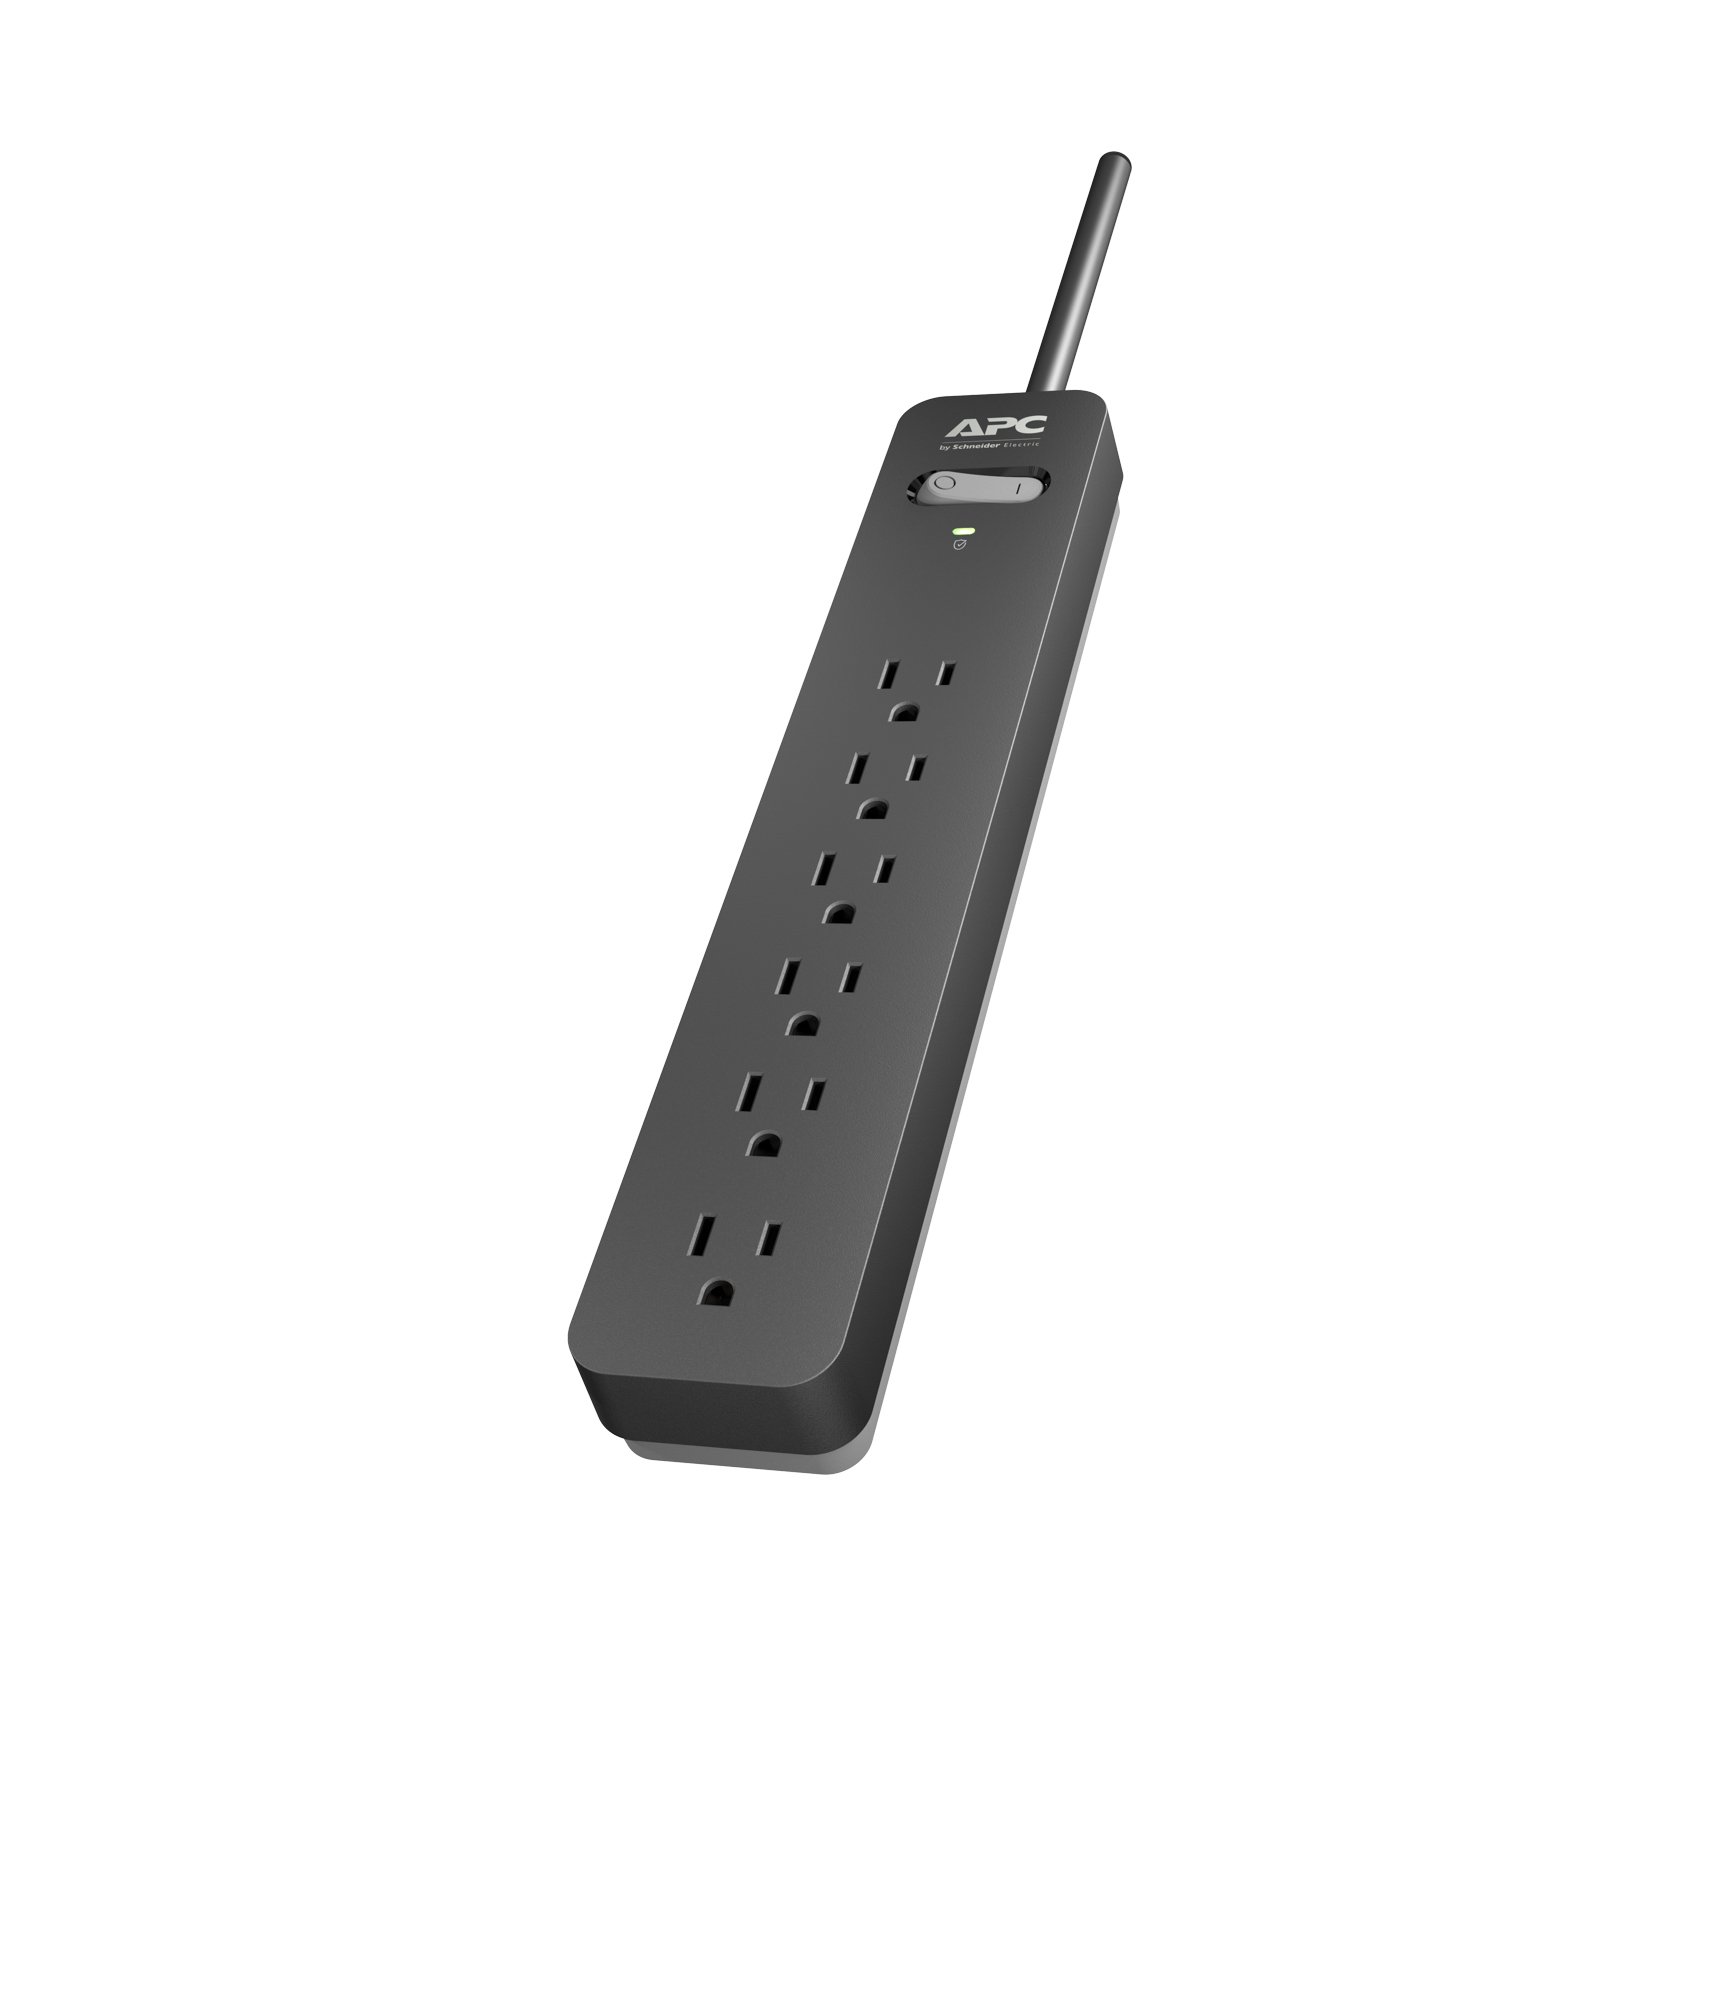 Book Cover APC Surge Protector with Extension Cord 10 Ft, PE610, 6-Outlets, 1080 Joule, Long Power Strip Black 10' Cord